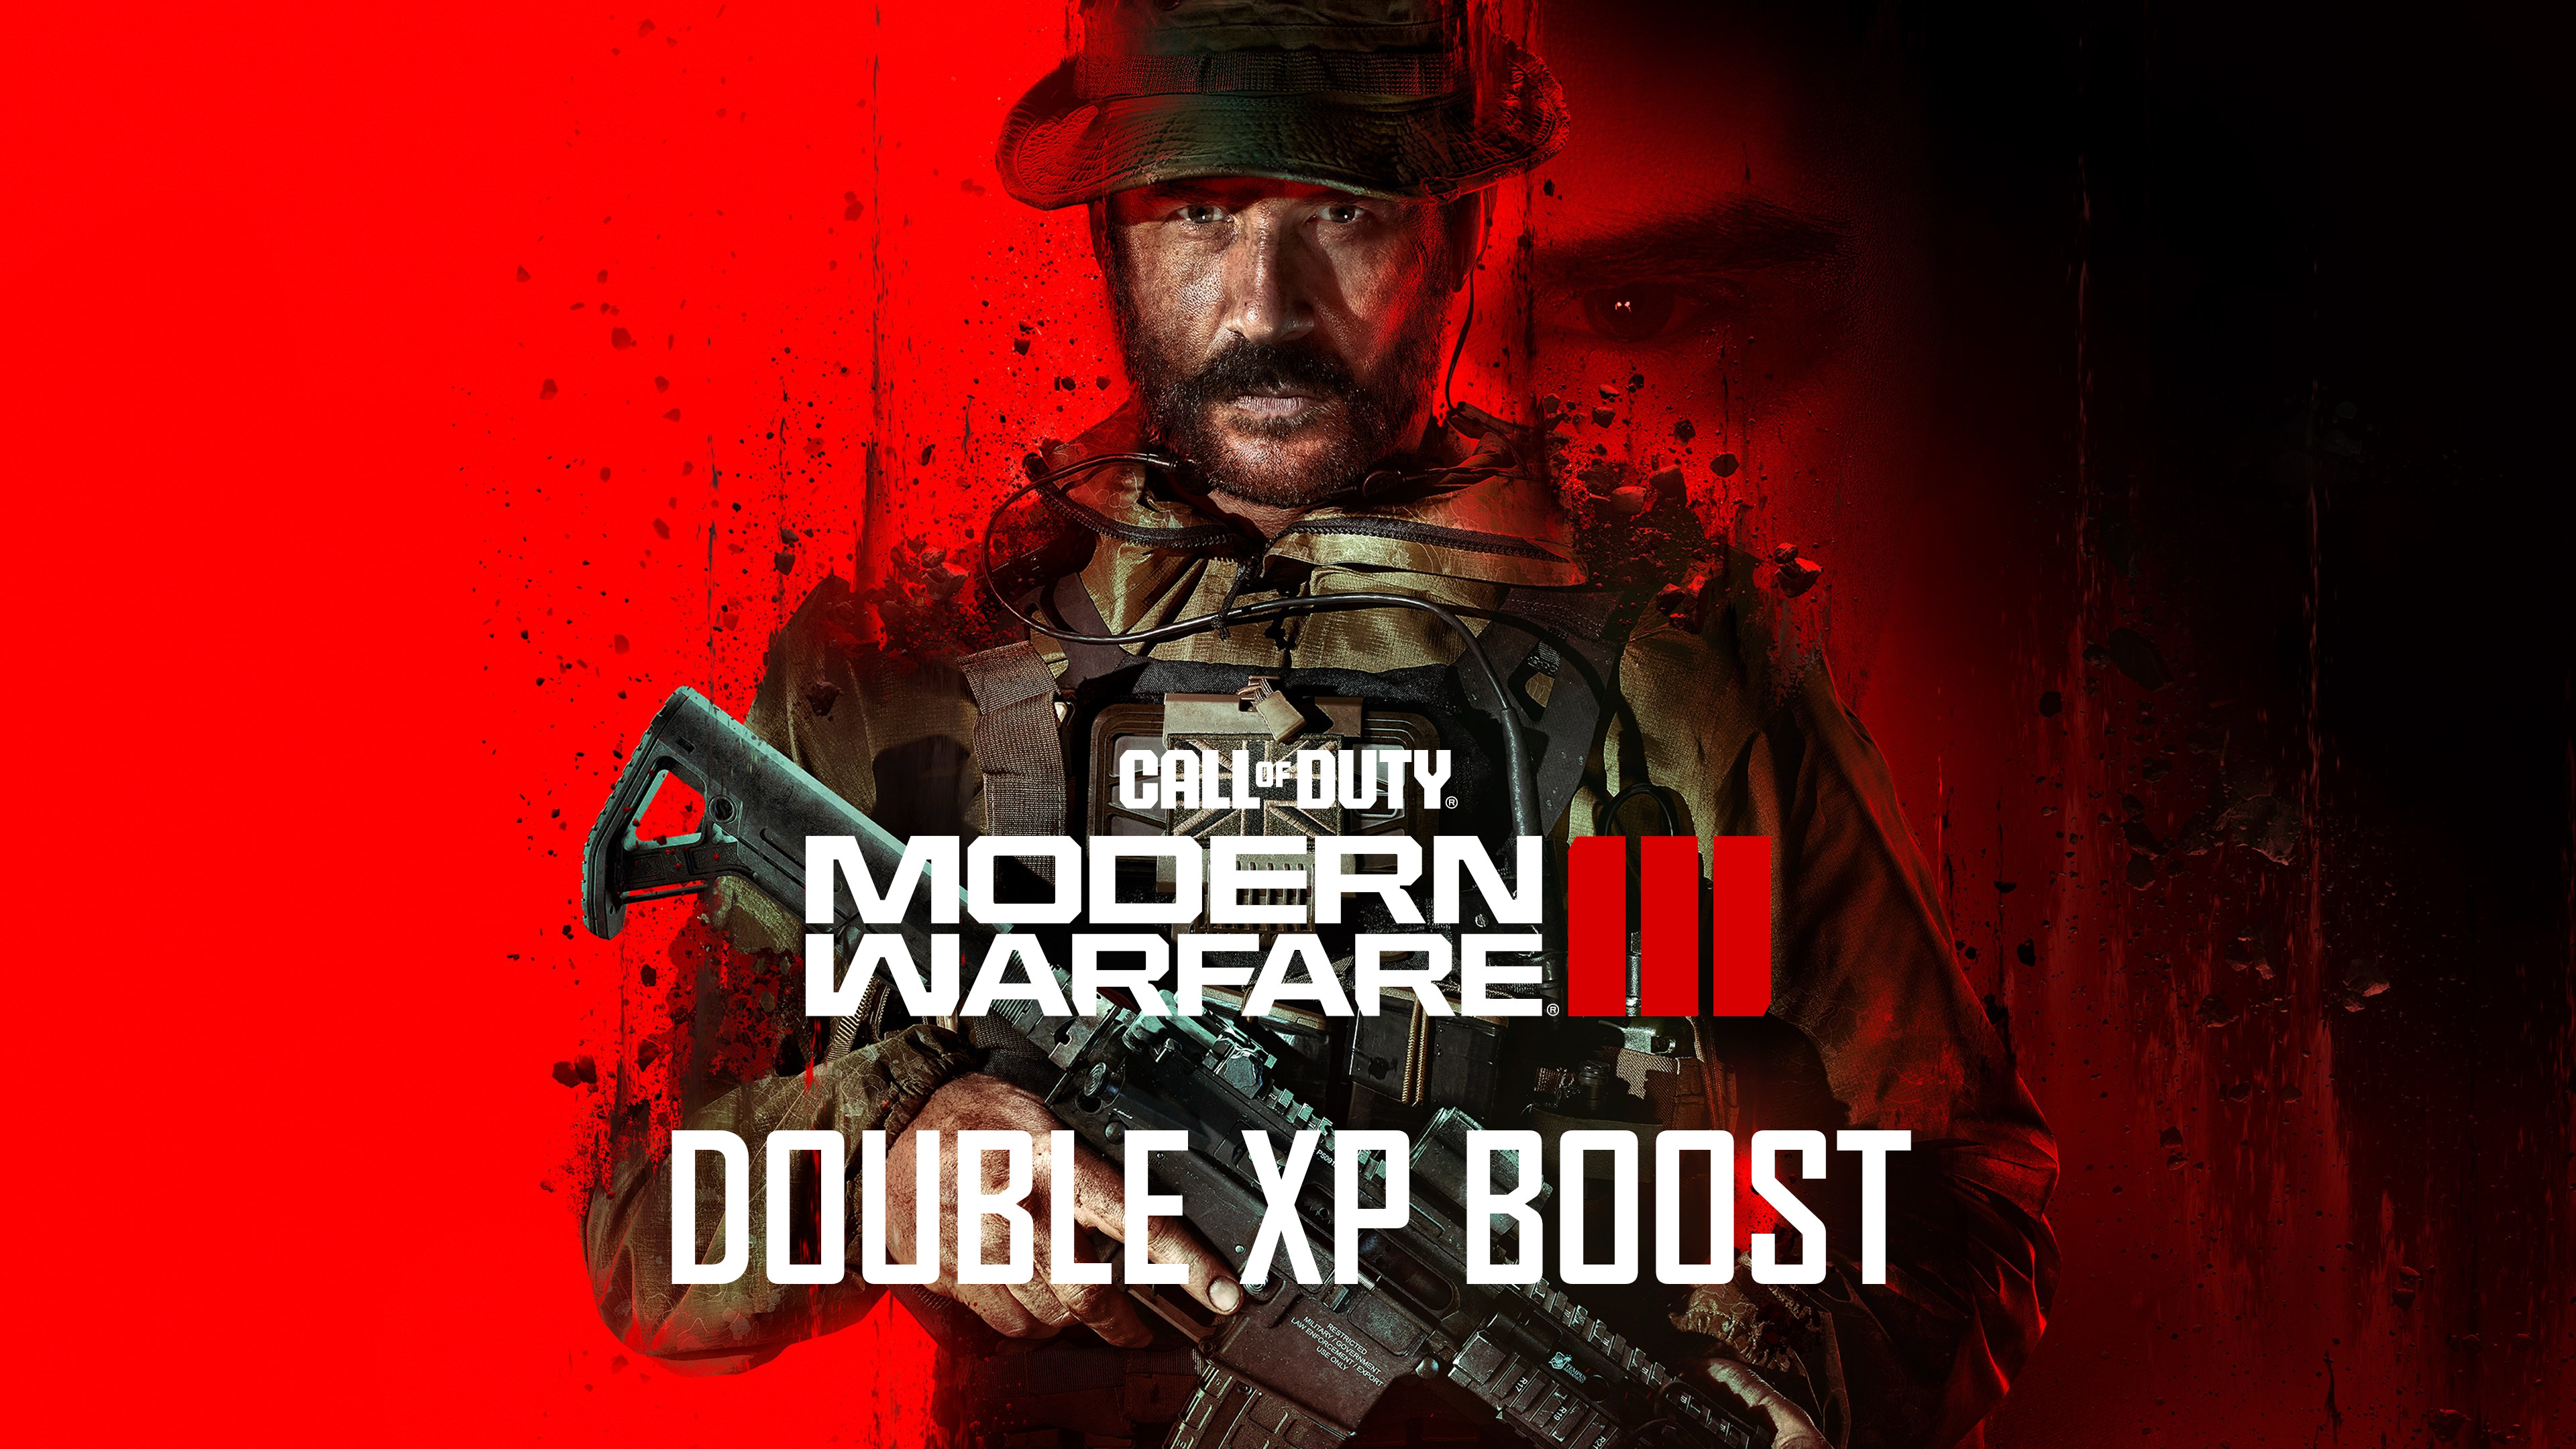 Call of Duty: Modern Warfare III - 5 Hours Double XP Boost PC/PS4/PS5/XBOX One/Series X|S CD Key $4.52